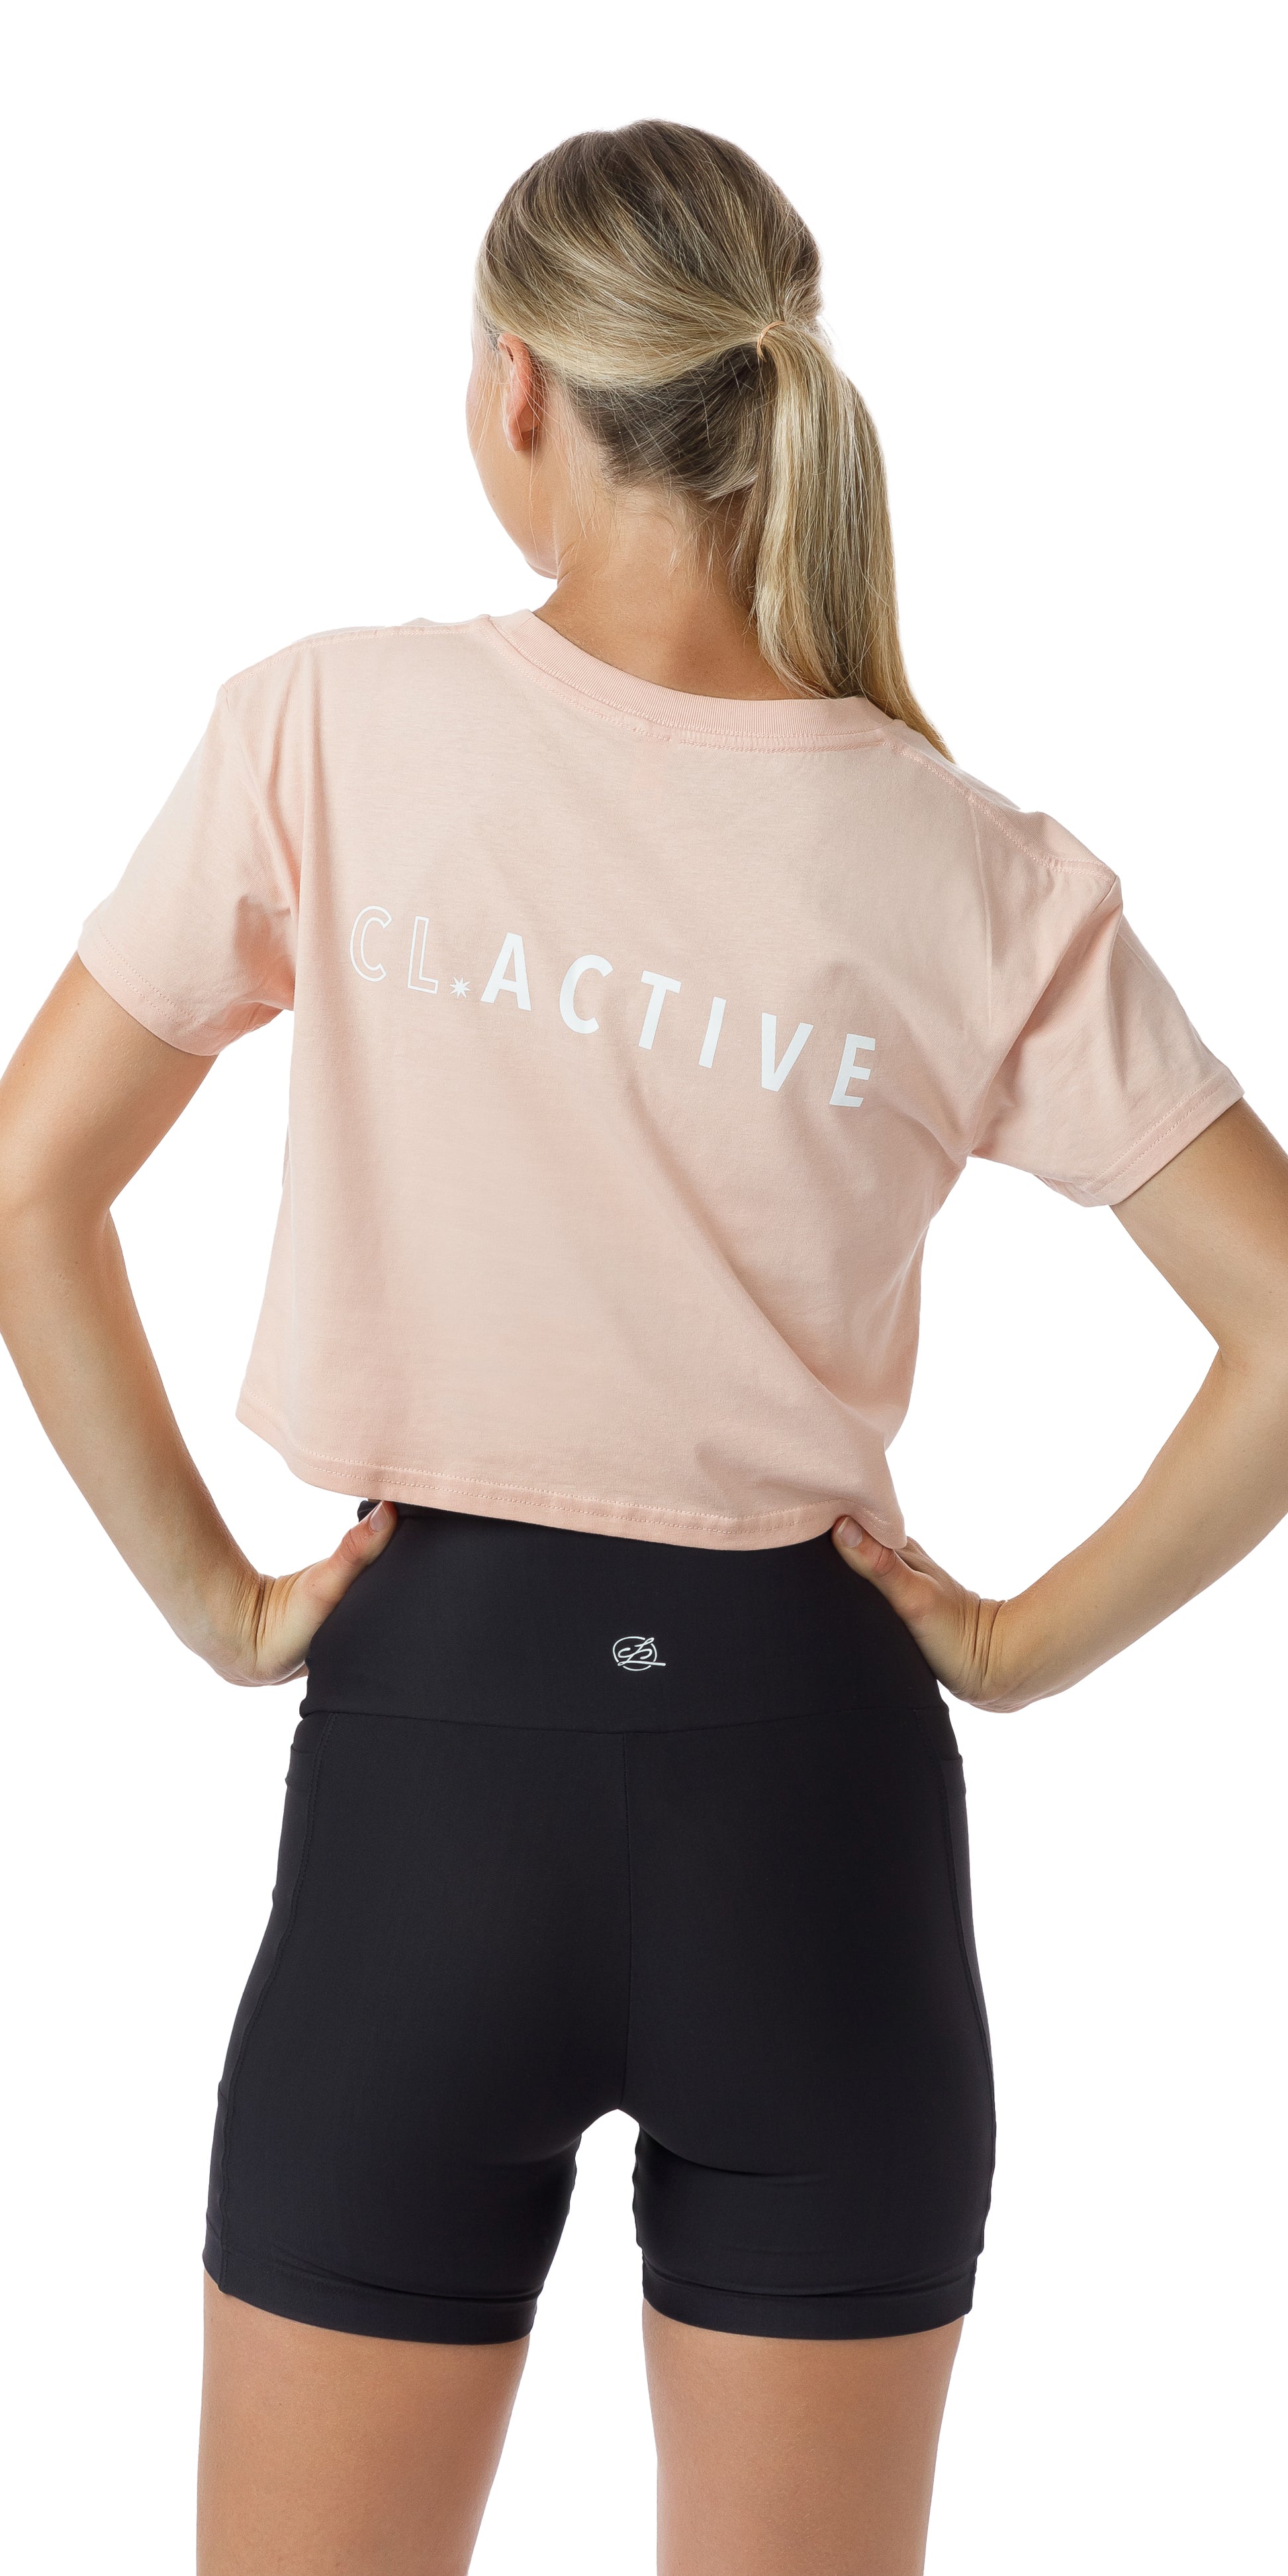 Rear view of girl in Pink CL Active Crop Tee and black biker shorts putting both hands on waist